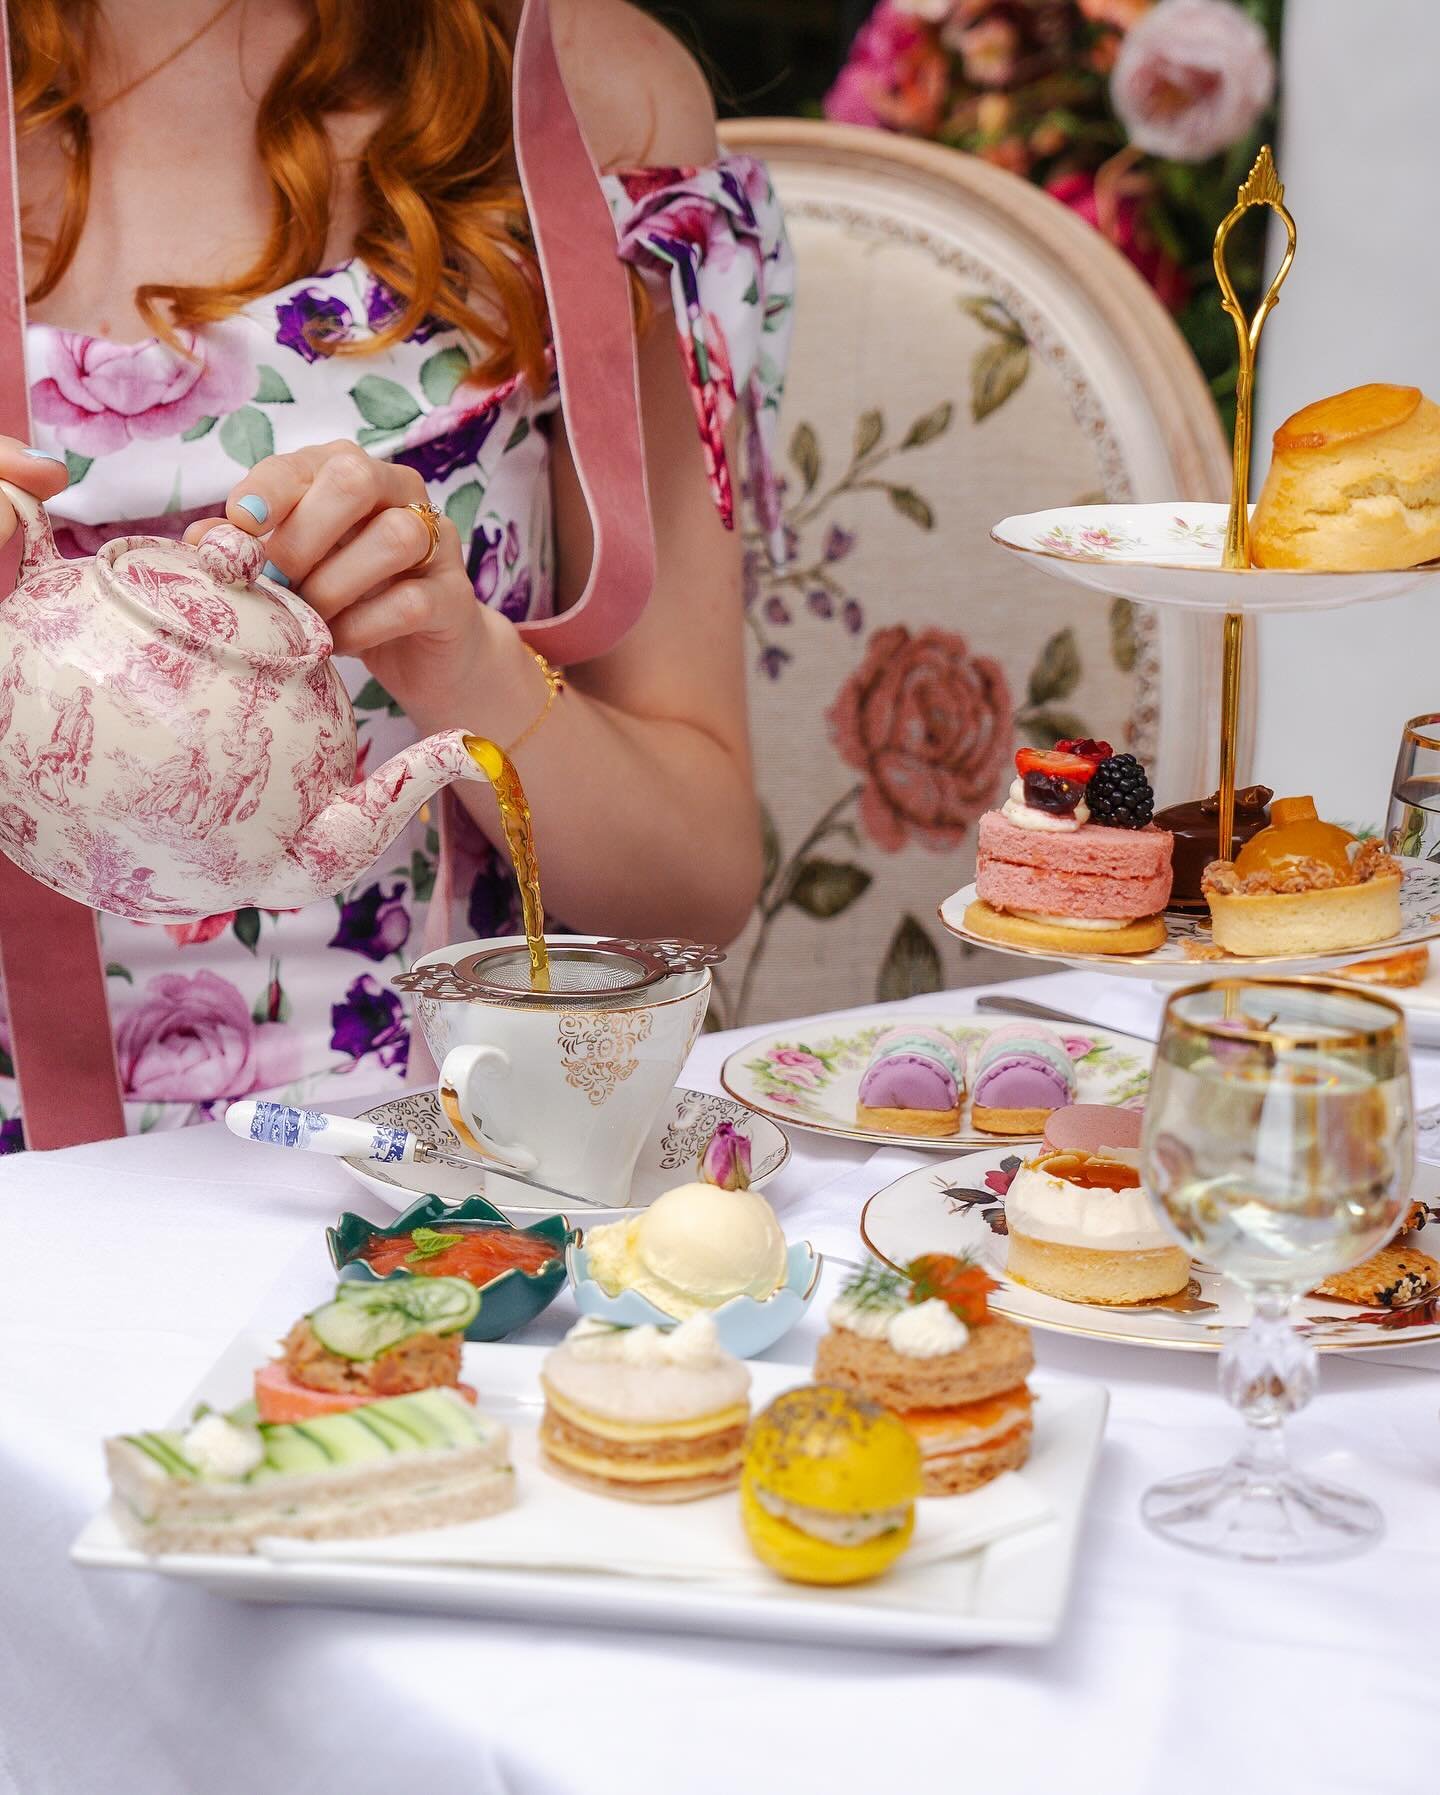 &lsquo;Tis the season for #bridgertoninspired afternoon teas in the ton! 💕🌷💌

Join us in Mayfair this season for the most esteemed and delightful teas in all of London. 🍓 To grace us with your presence on Berkeley Street, please visit our website